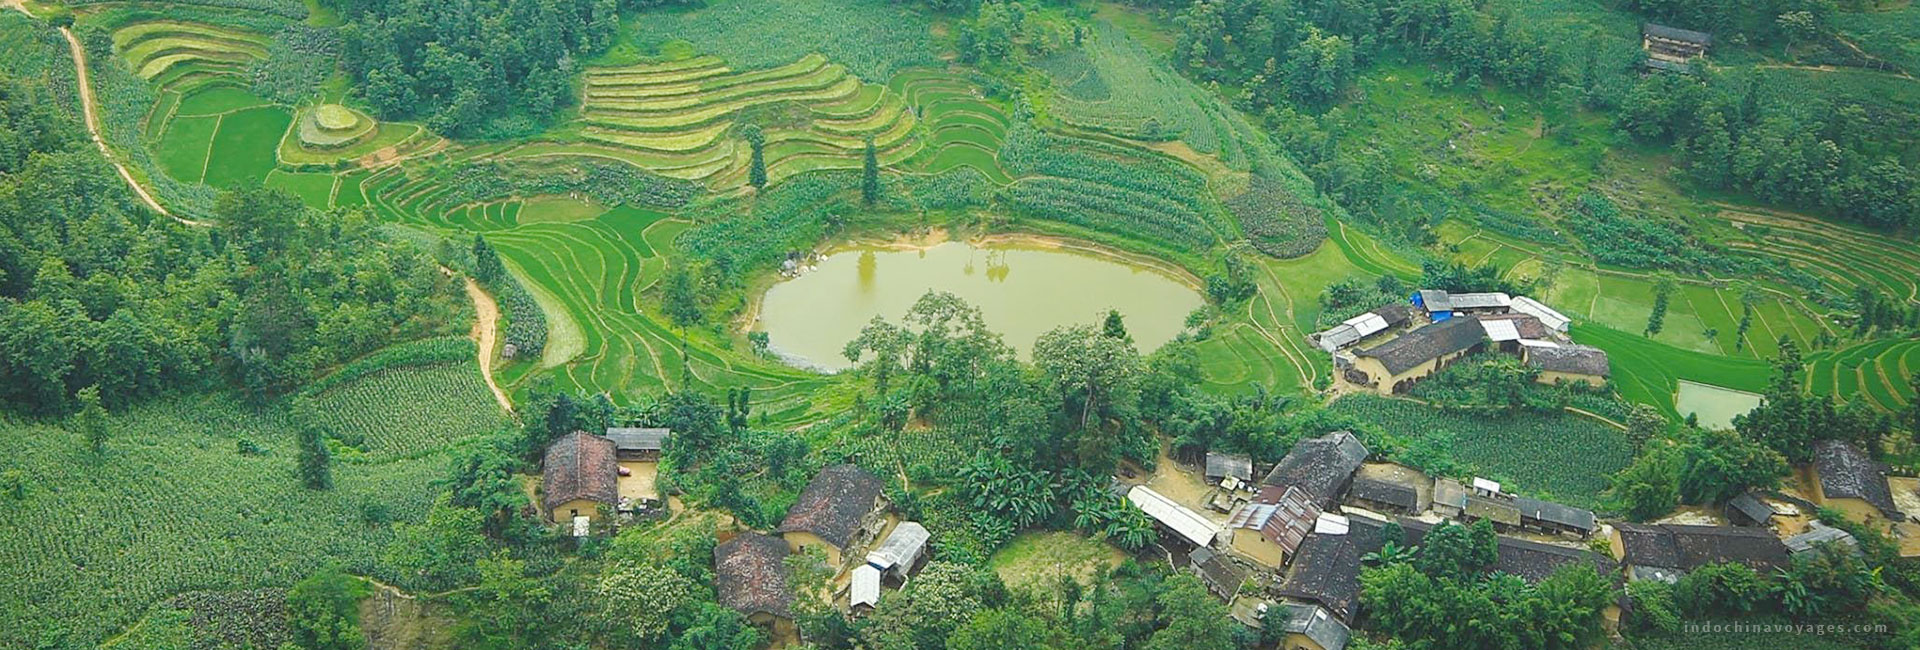 Explore Unfold Ha Giang 5 Days